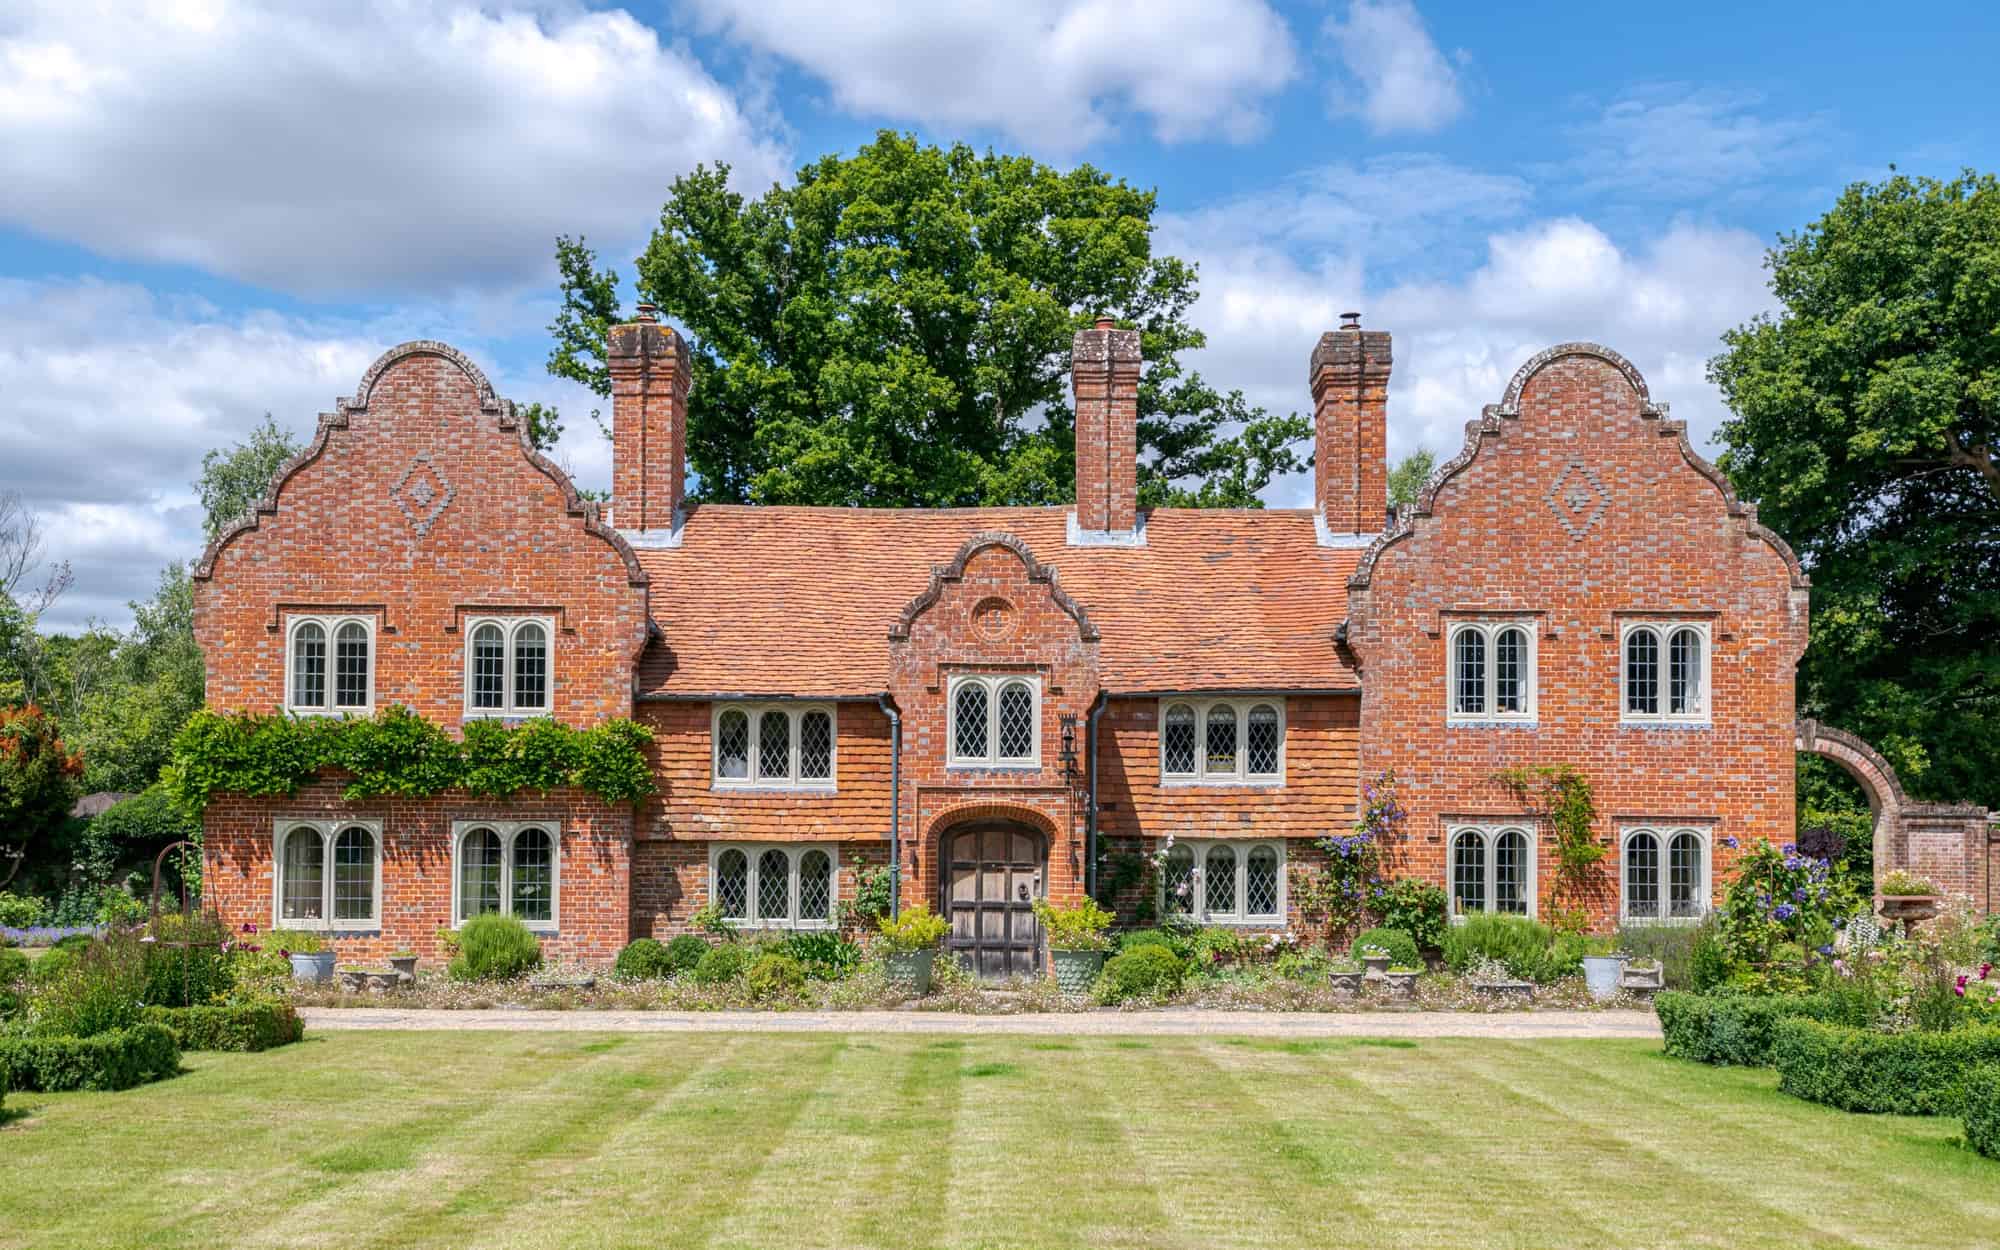 Jacobean Manor GU8 - A beautiful Jacobean Manor house with elegant interiors and gardens stretching to 15 acres, including outdoor pool - The Location Guys